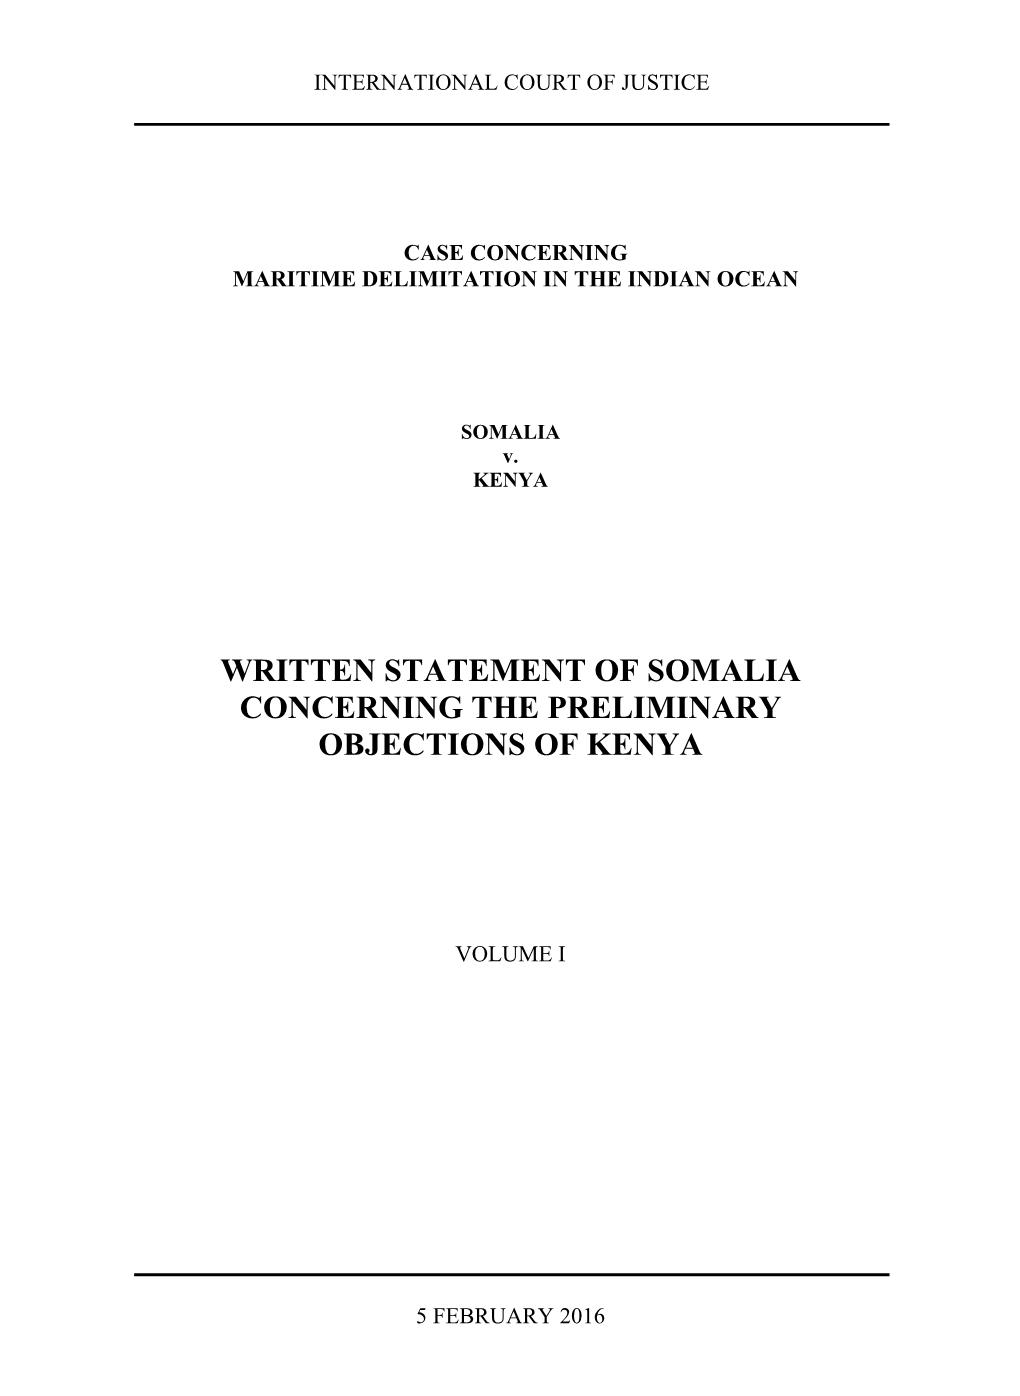 Written Statement of Somalia Concerning the Preliminary Objections of Kenya